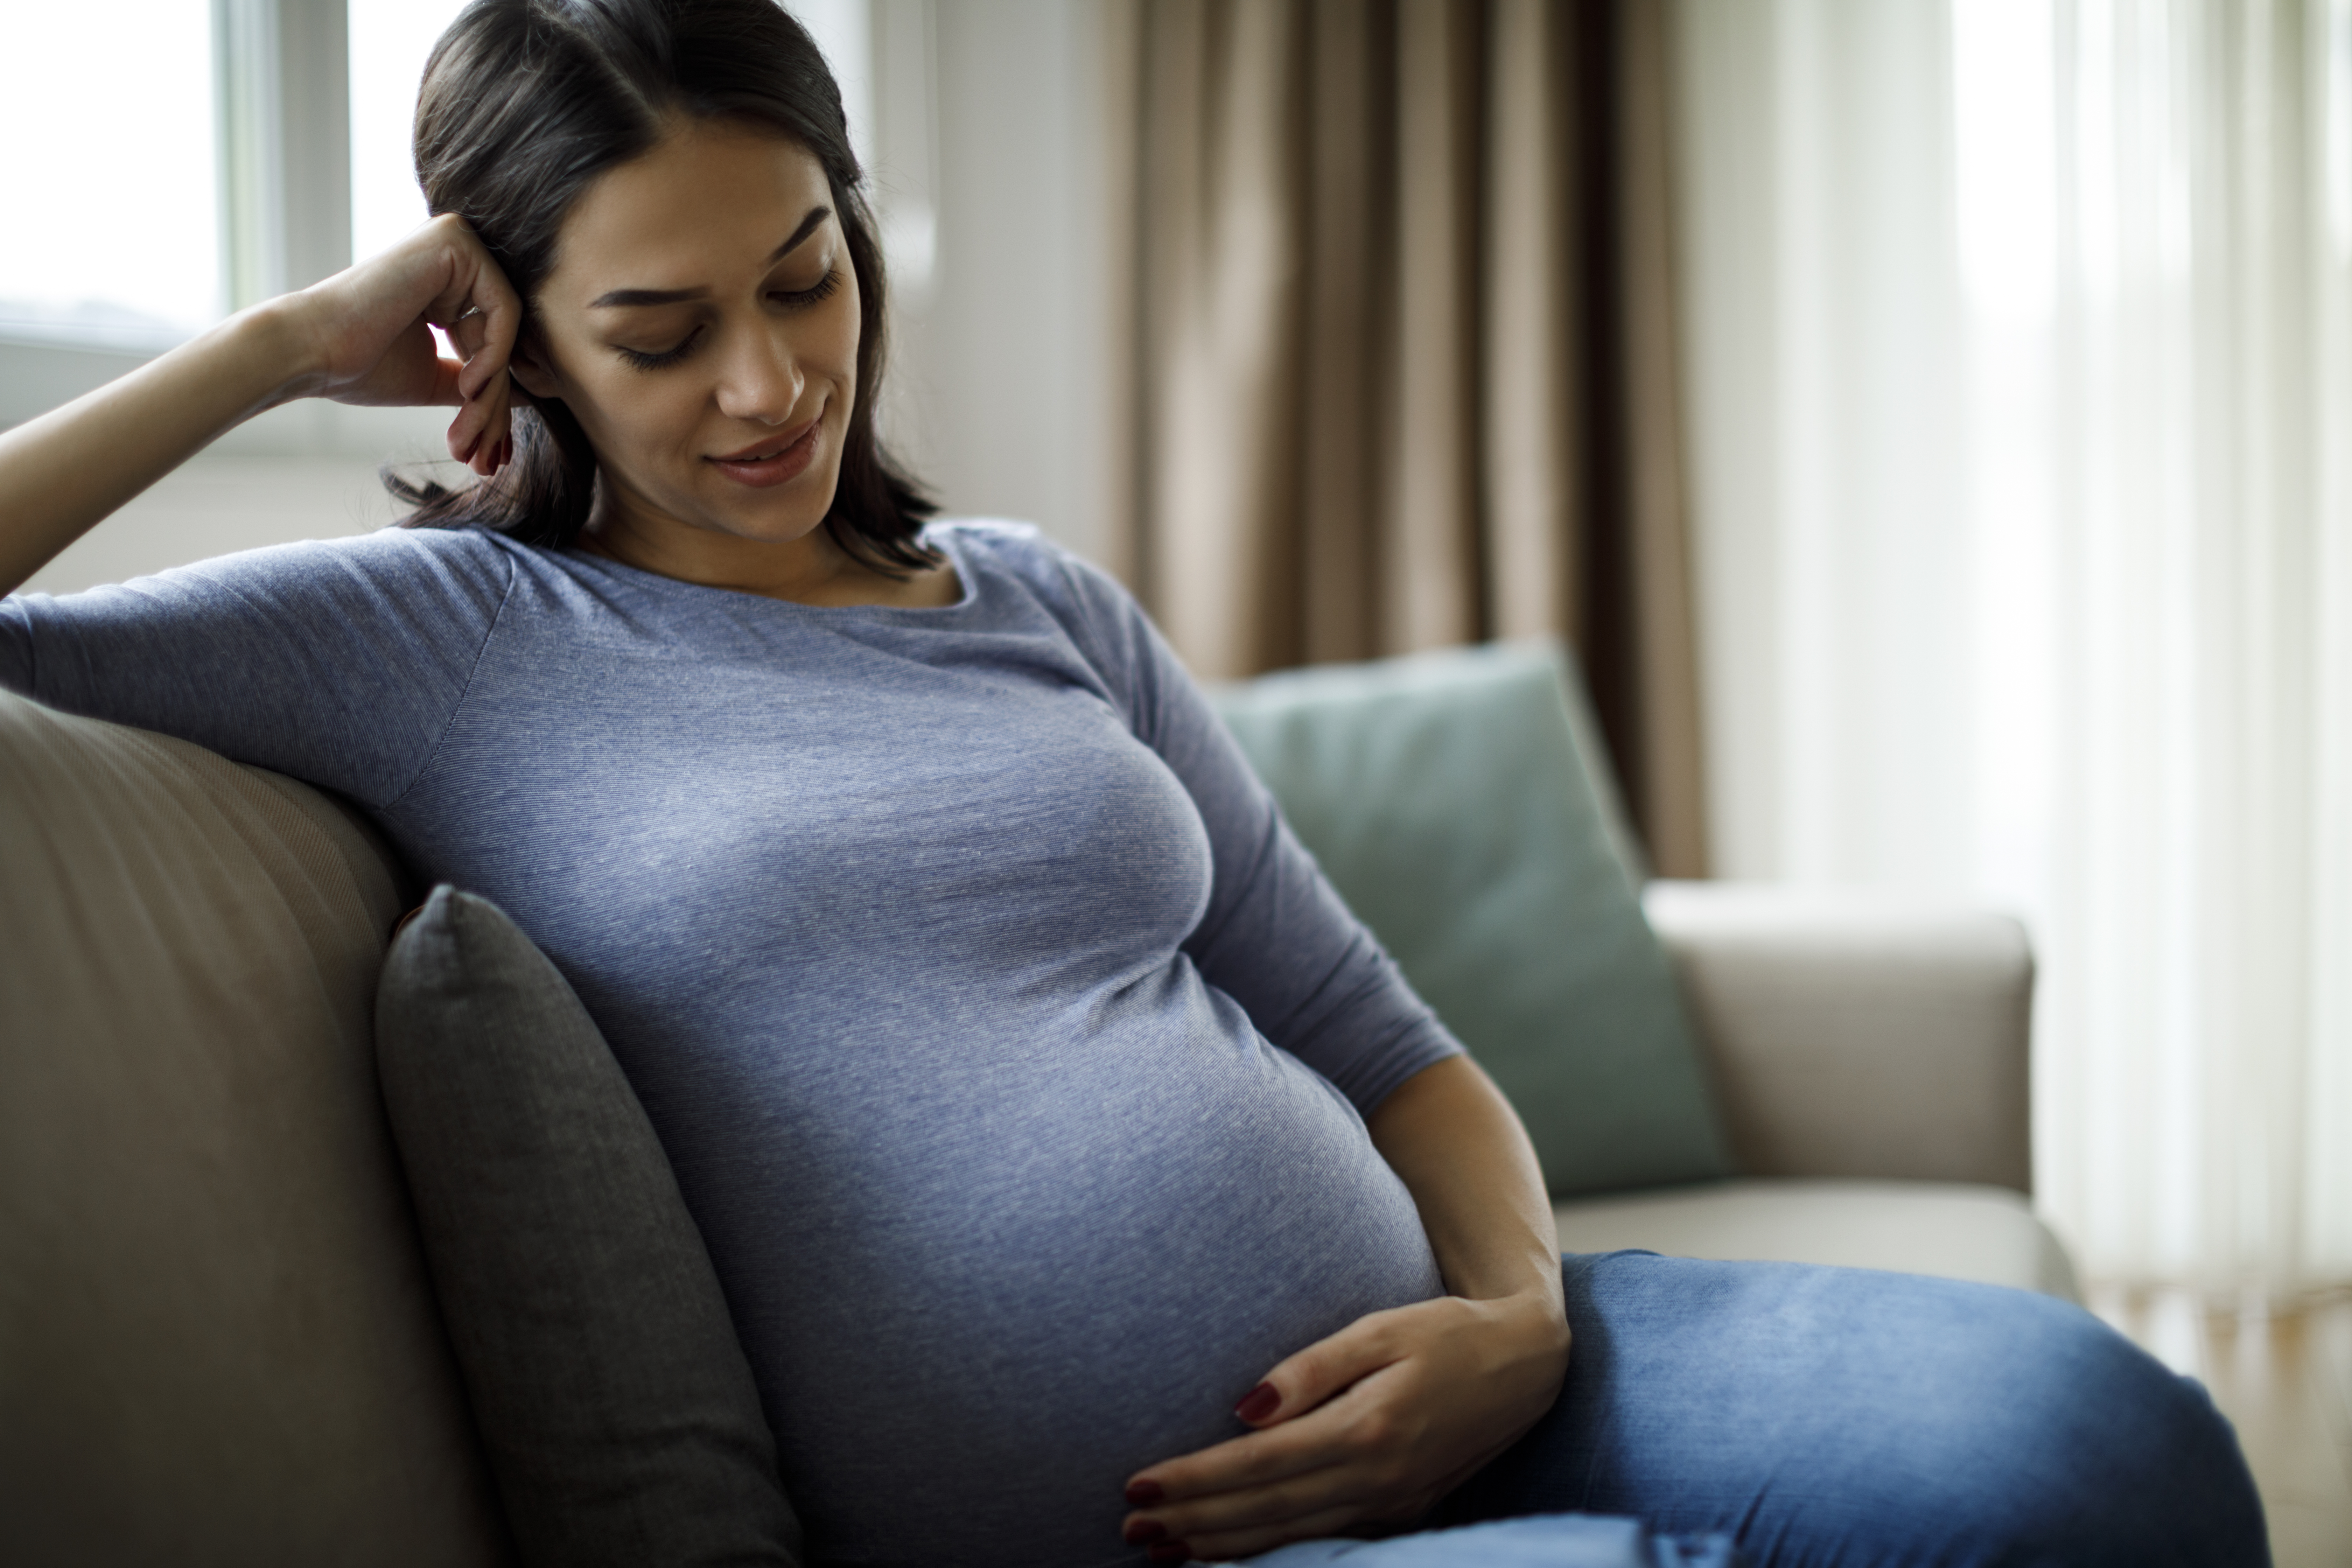 A pregnant woman thinking | Source: Getty Images